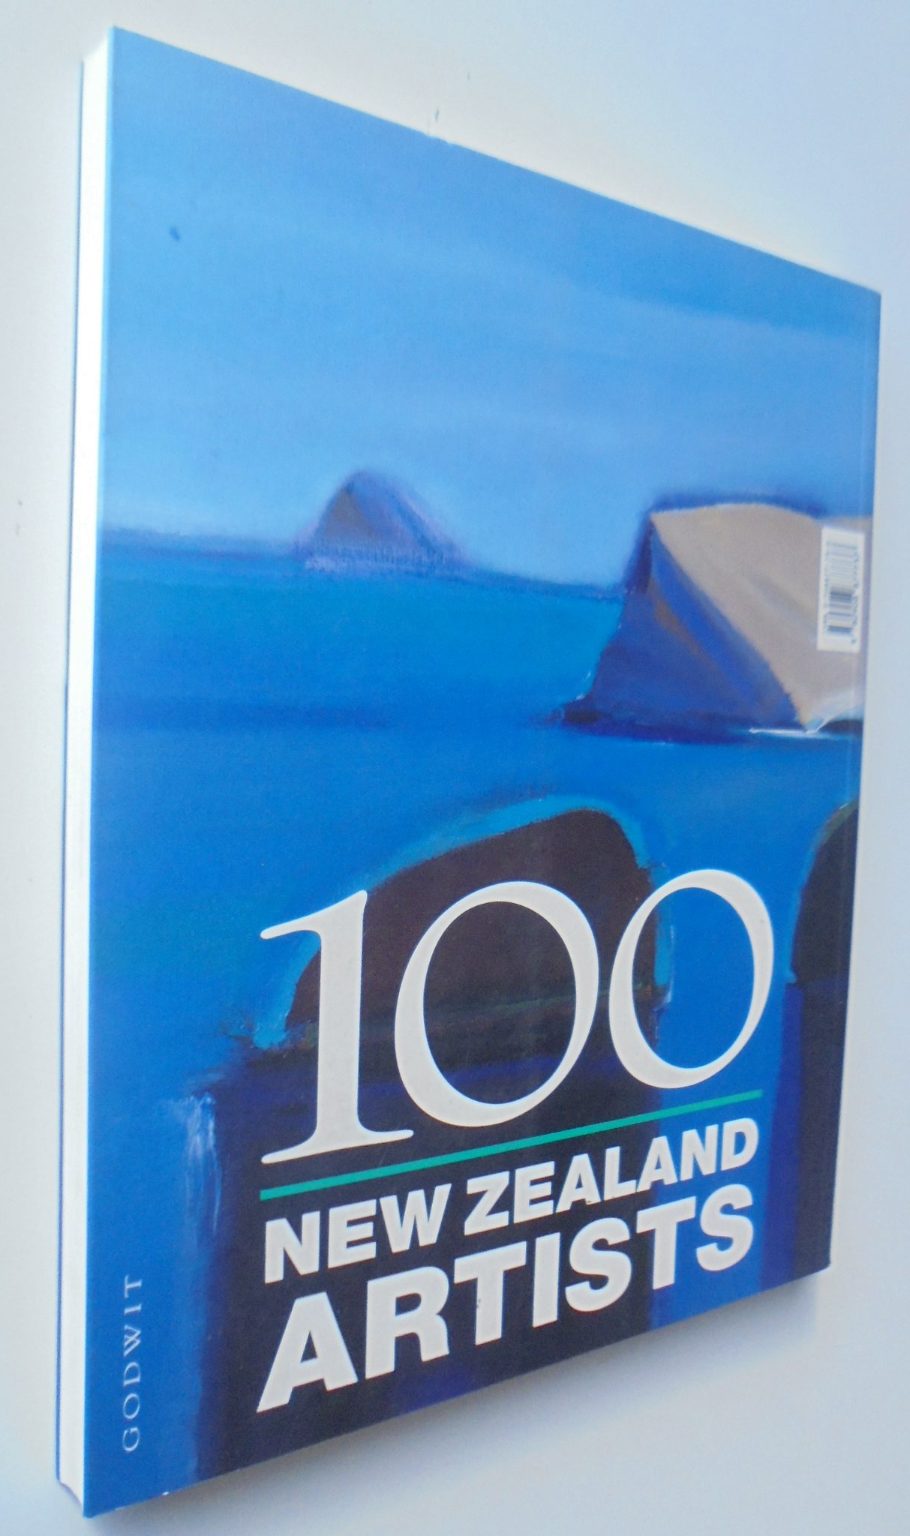 100 New Zealand Paintings. By Warwick Brown